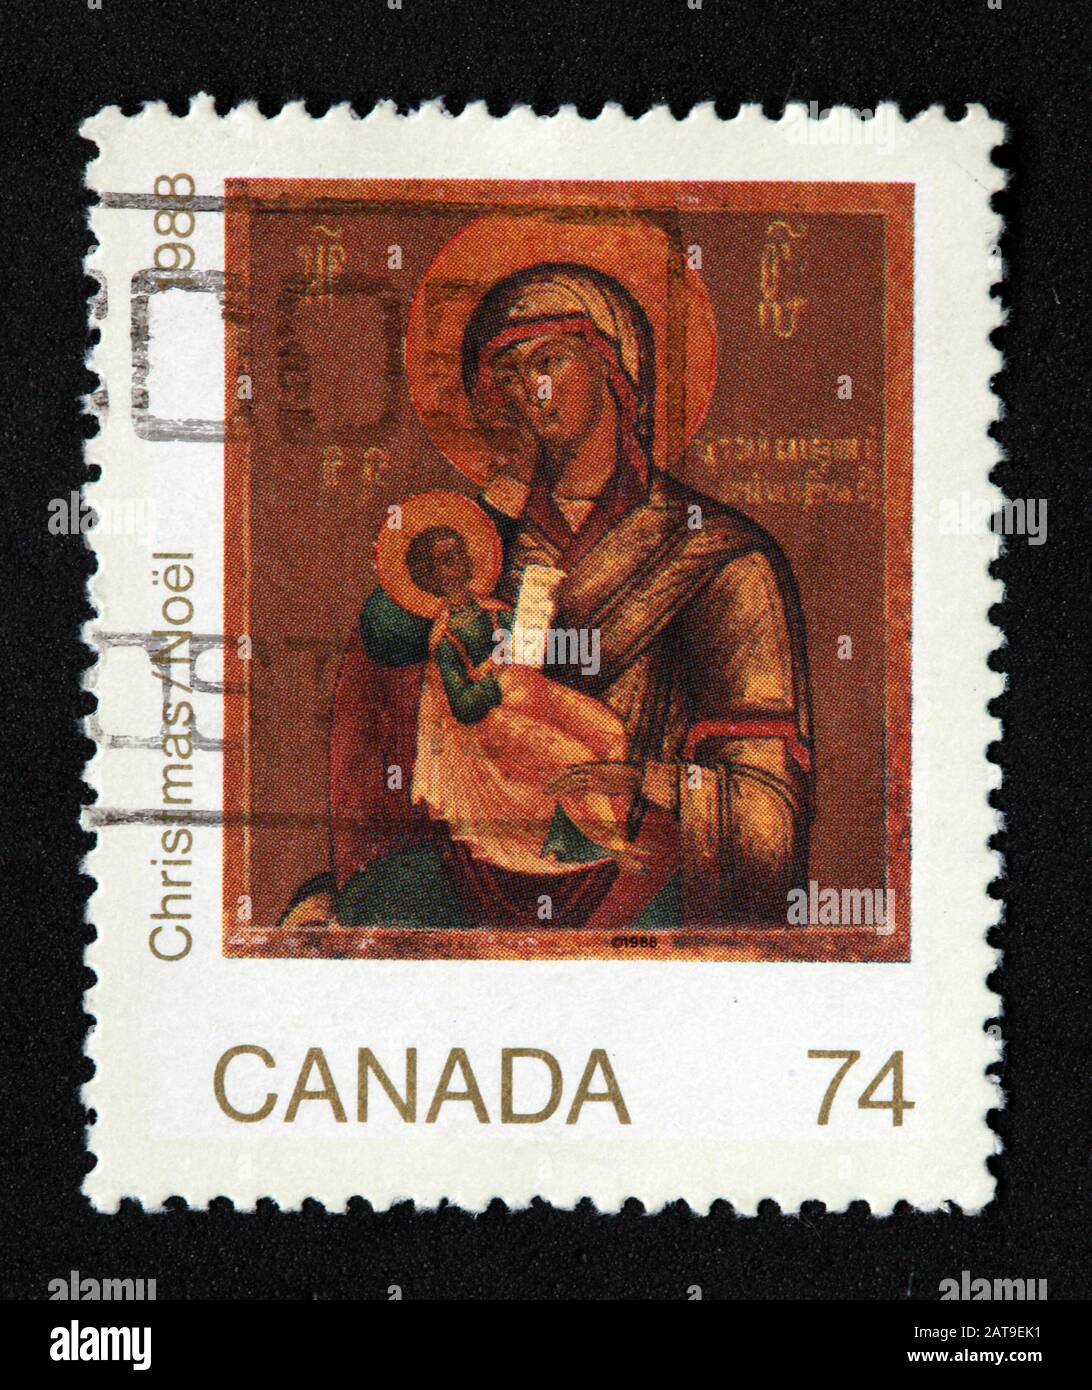 Canadian Stamp, Canada Stamp, Canada Post,used stamp, Canada 74c , 1988, Christmas, Noel, Mary, Christ,Jesus Christ Stock Photo